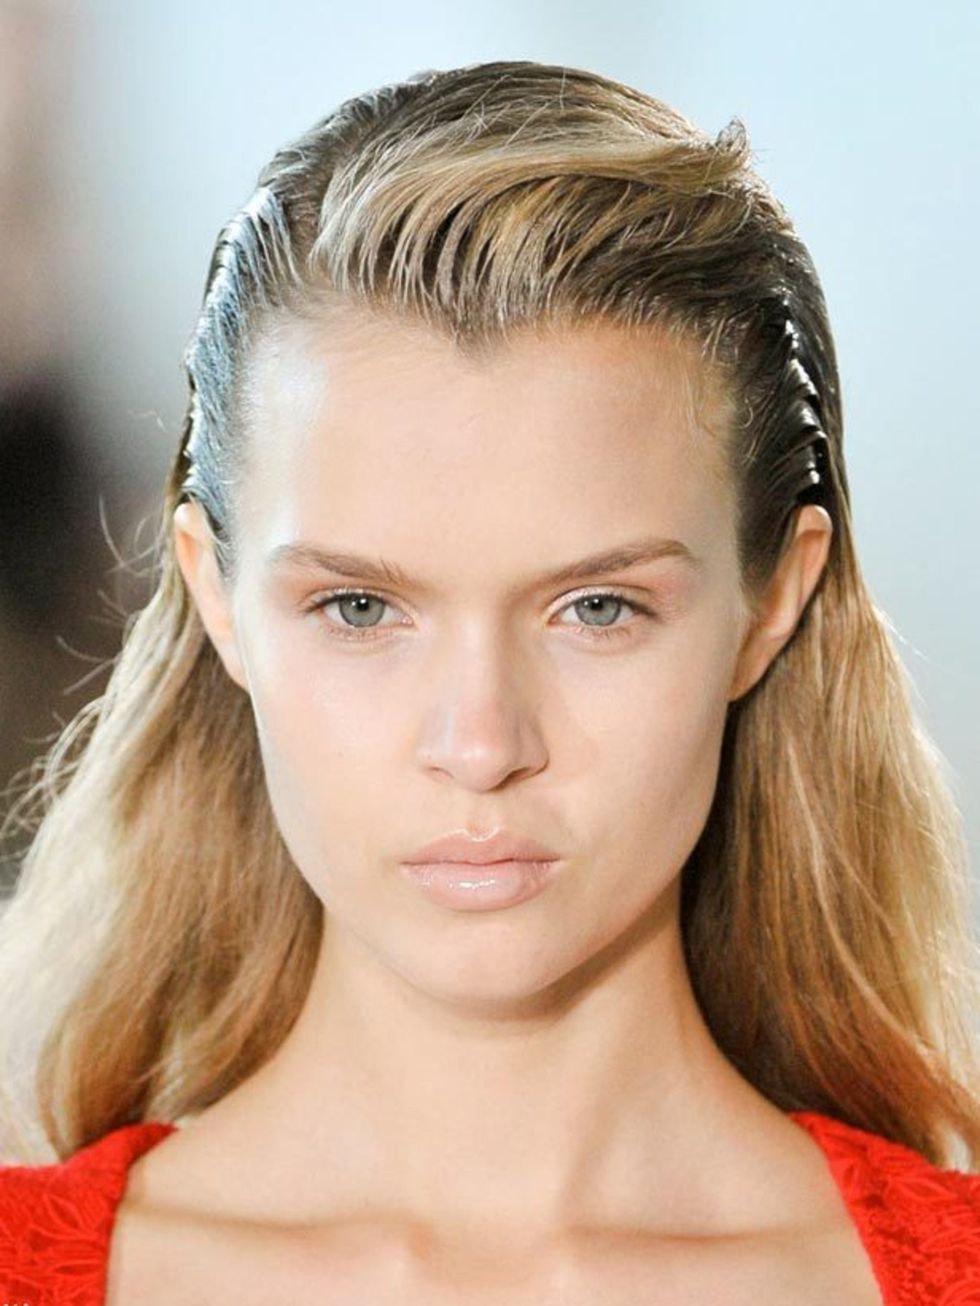 <p>It's back! Wet-look hair looks set to be big next season. It started in New York with shine and evolved to full-on wet hair in London, in fact the hair at Giles was literally wet as Paul Hanlon sent all 40+ models down the catwalk with freshly washed h